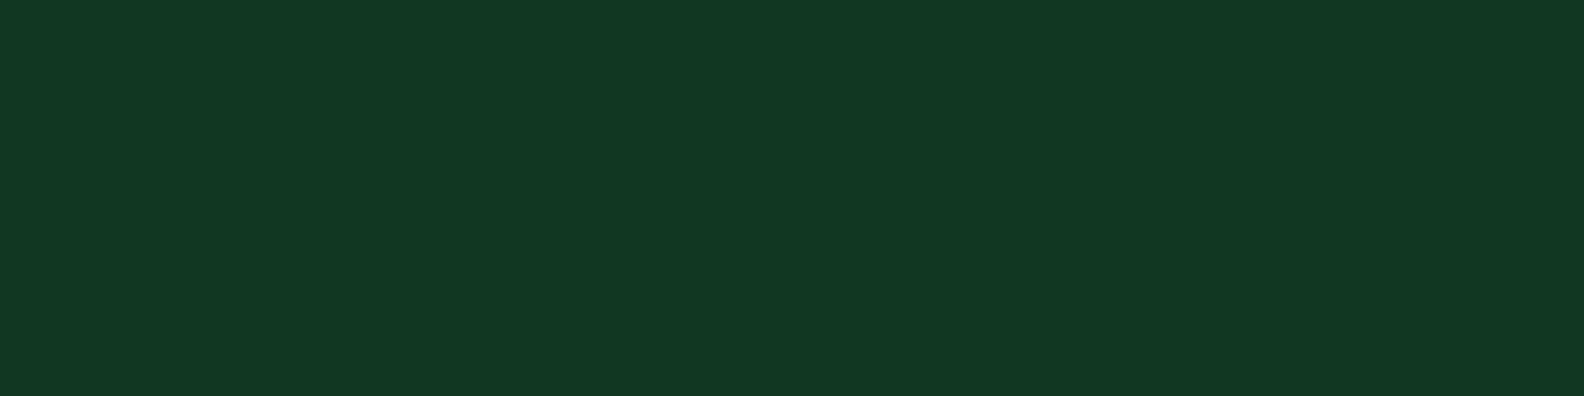 1584x396 Phthalo Green Solid Color Background